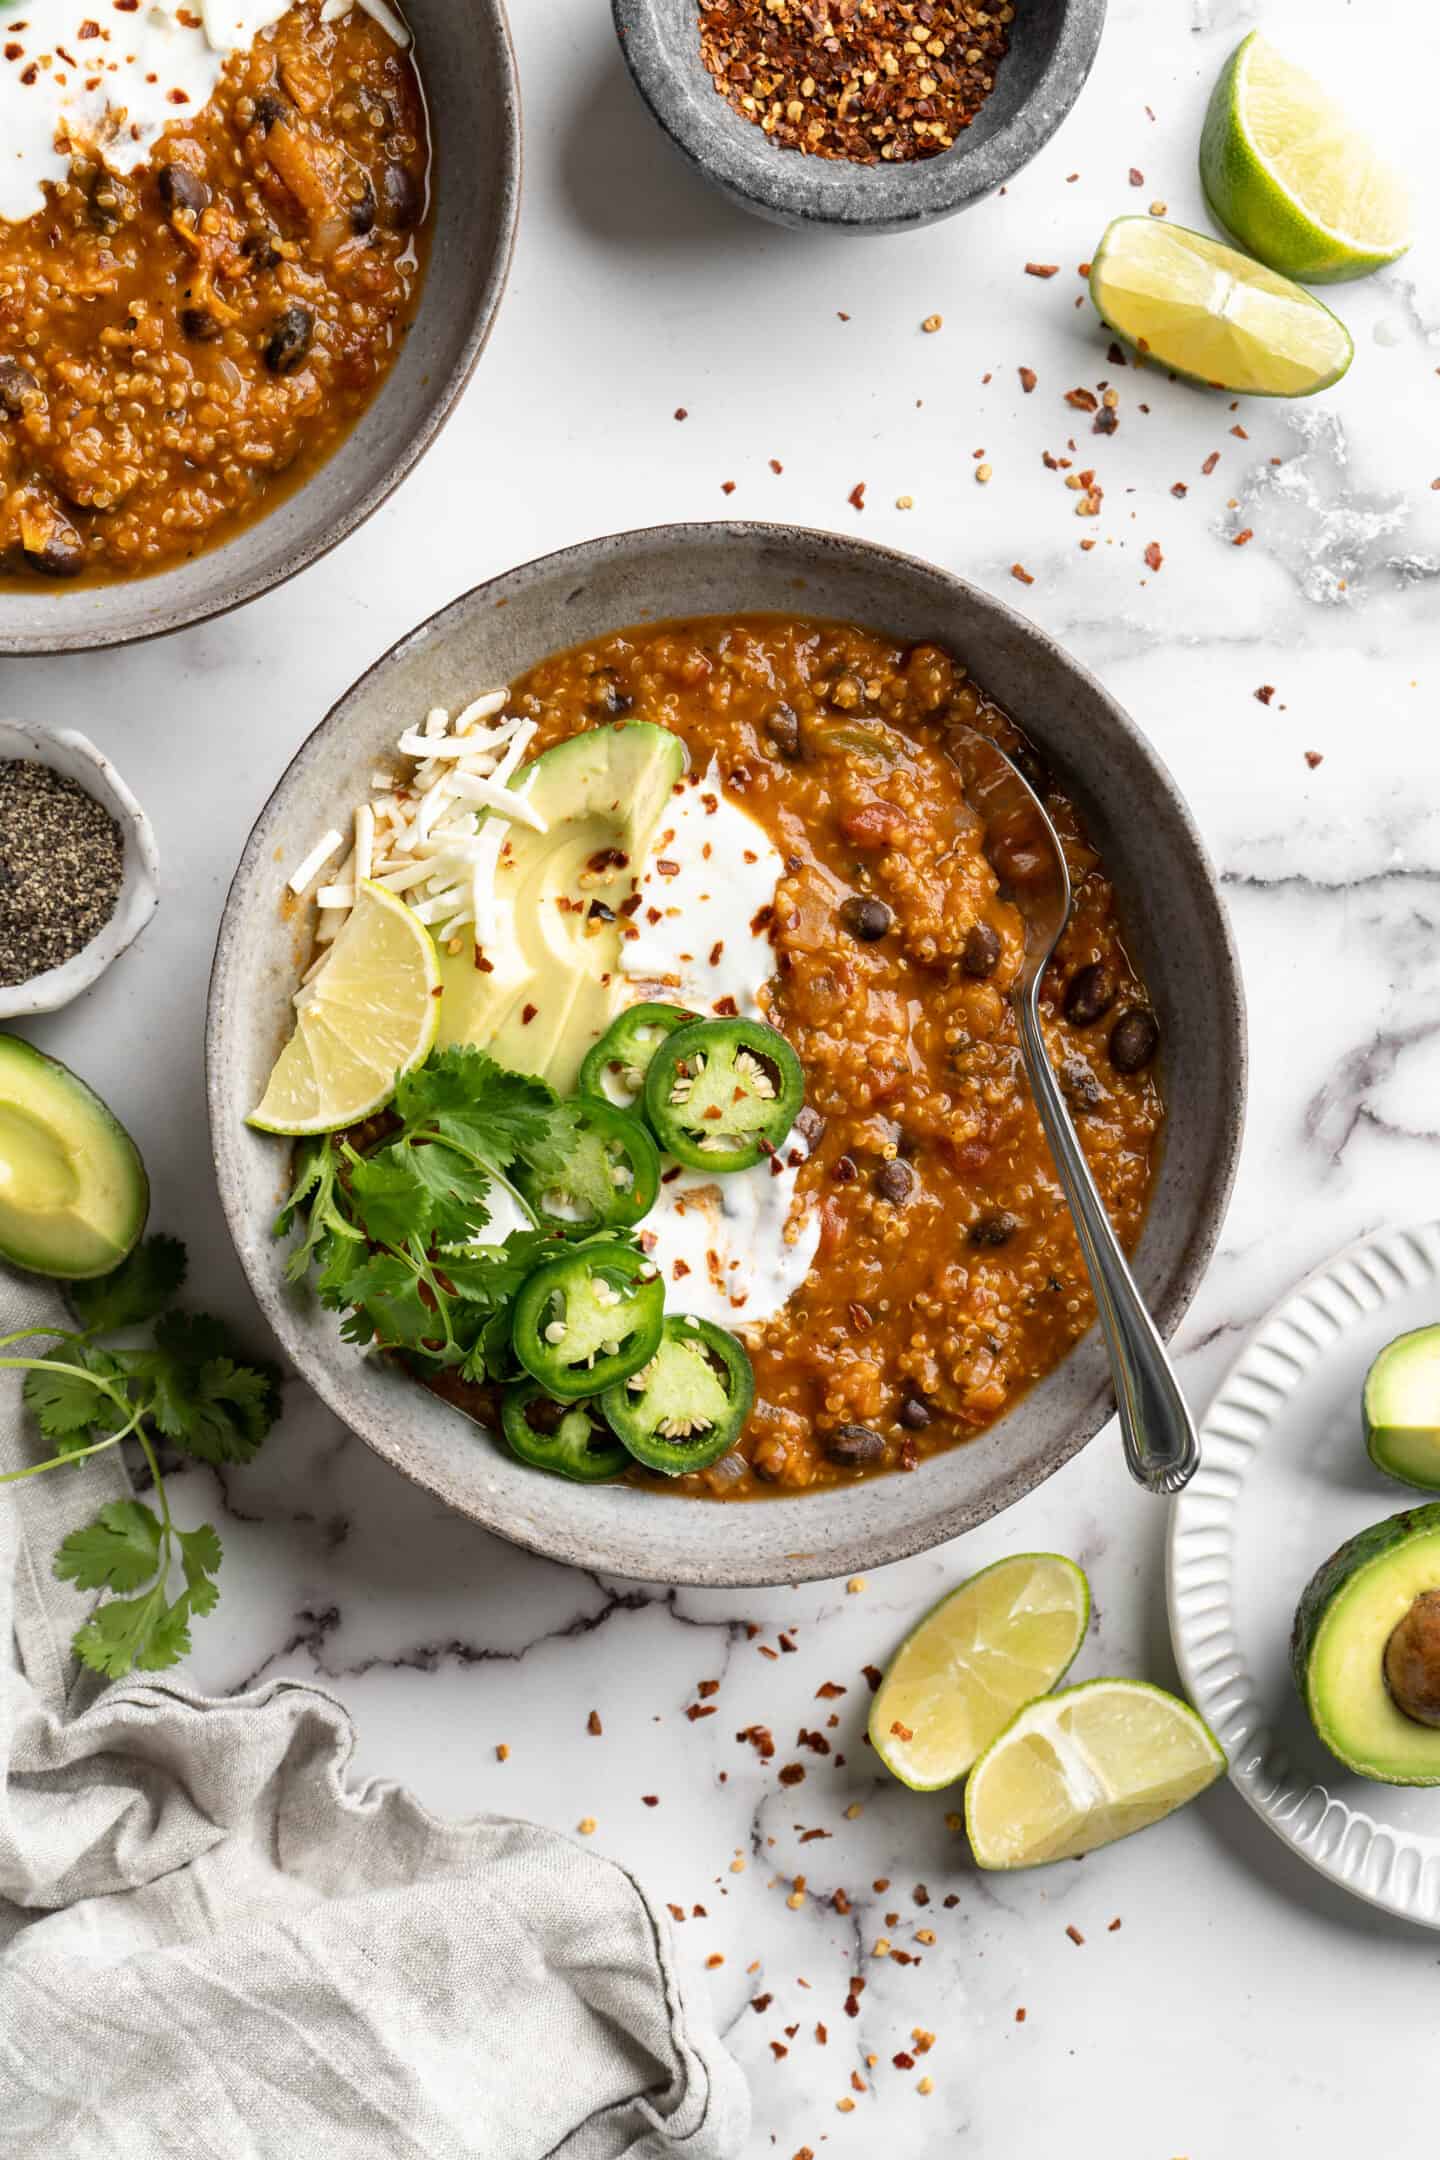 Bowl of pumpkin chili topped with jalapenos and avocado